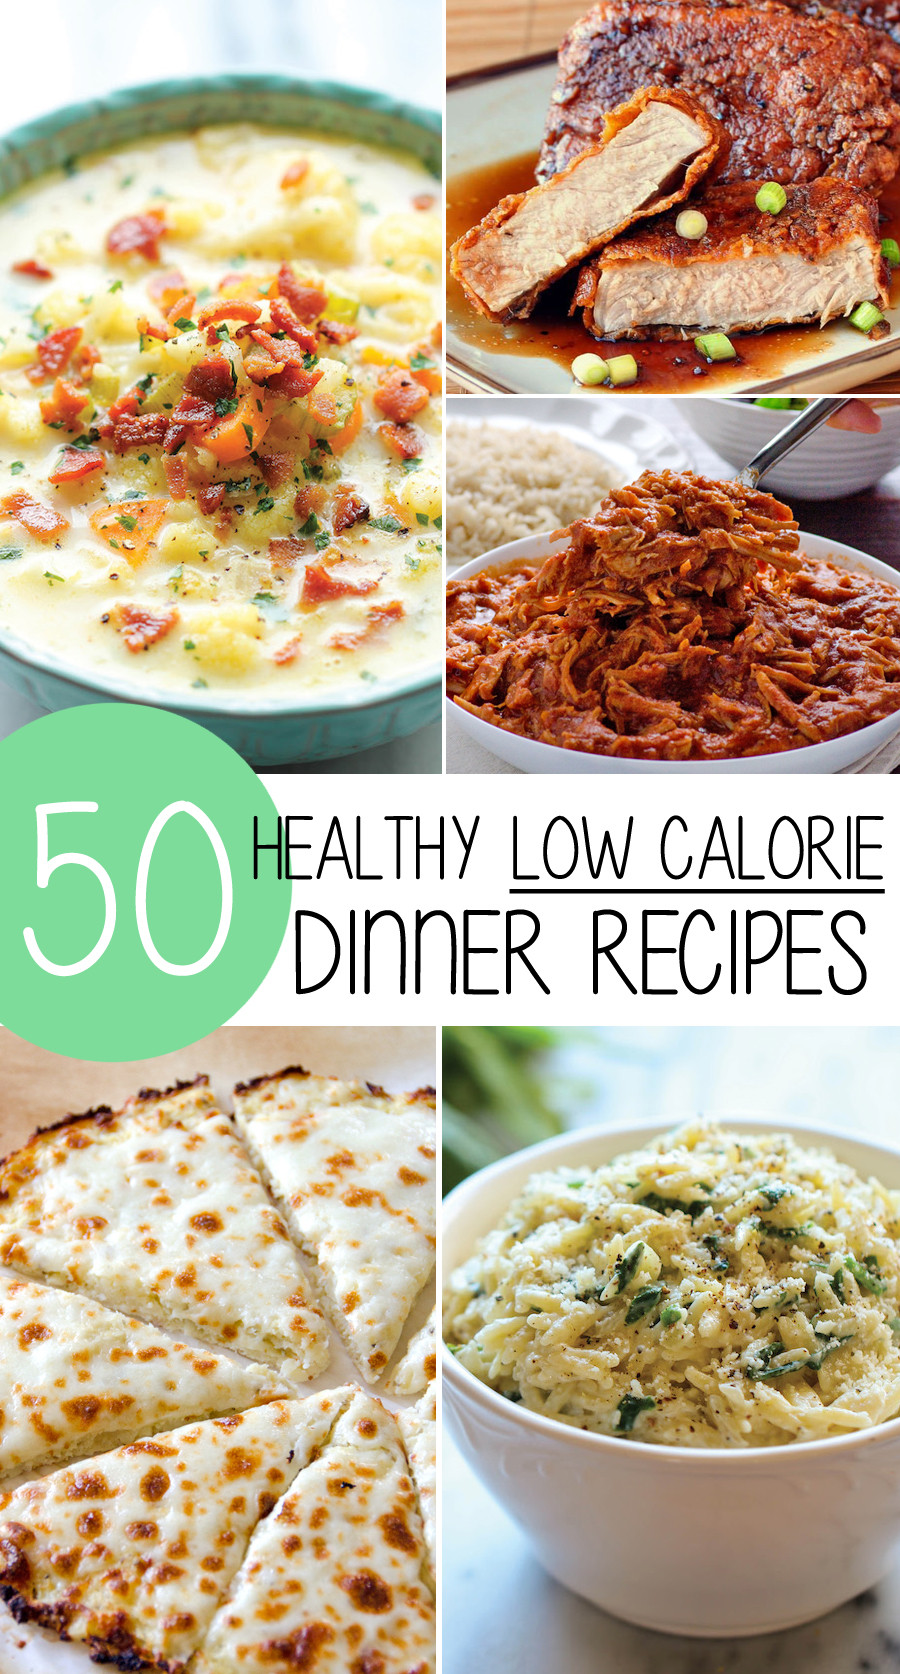 Diet Food Recipes For Weight Loss
 50 Healthy Low Calorie Weight Loss Dinner Recipes